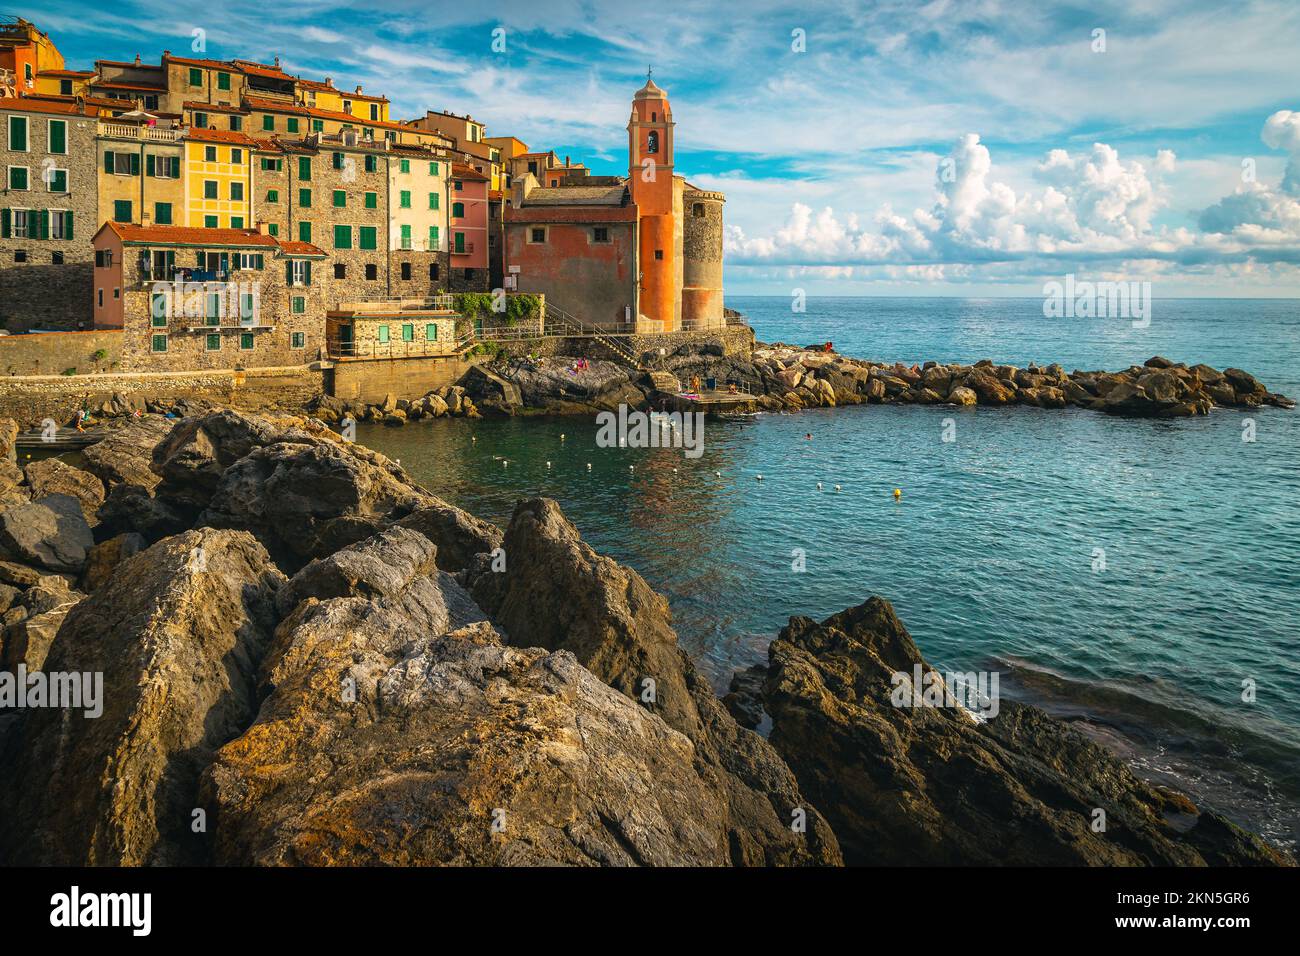 Amazing old mediterranean fishing village and touristic place with colorful seaside buildings in Tellaro, Lerici, Liguria, Italy, Europe Stock Photo